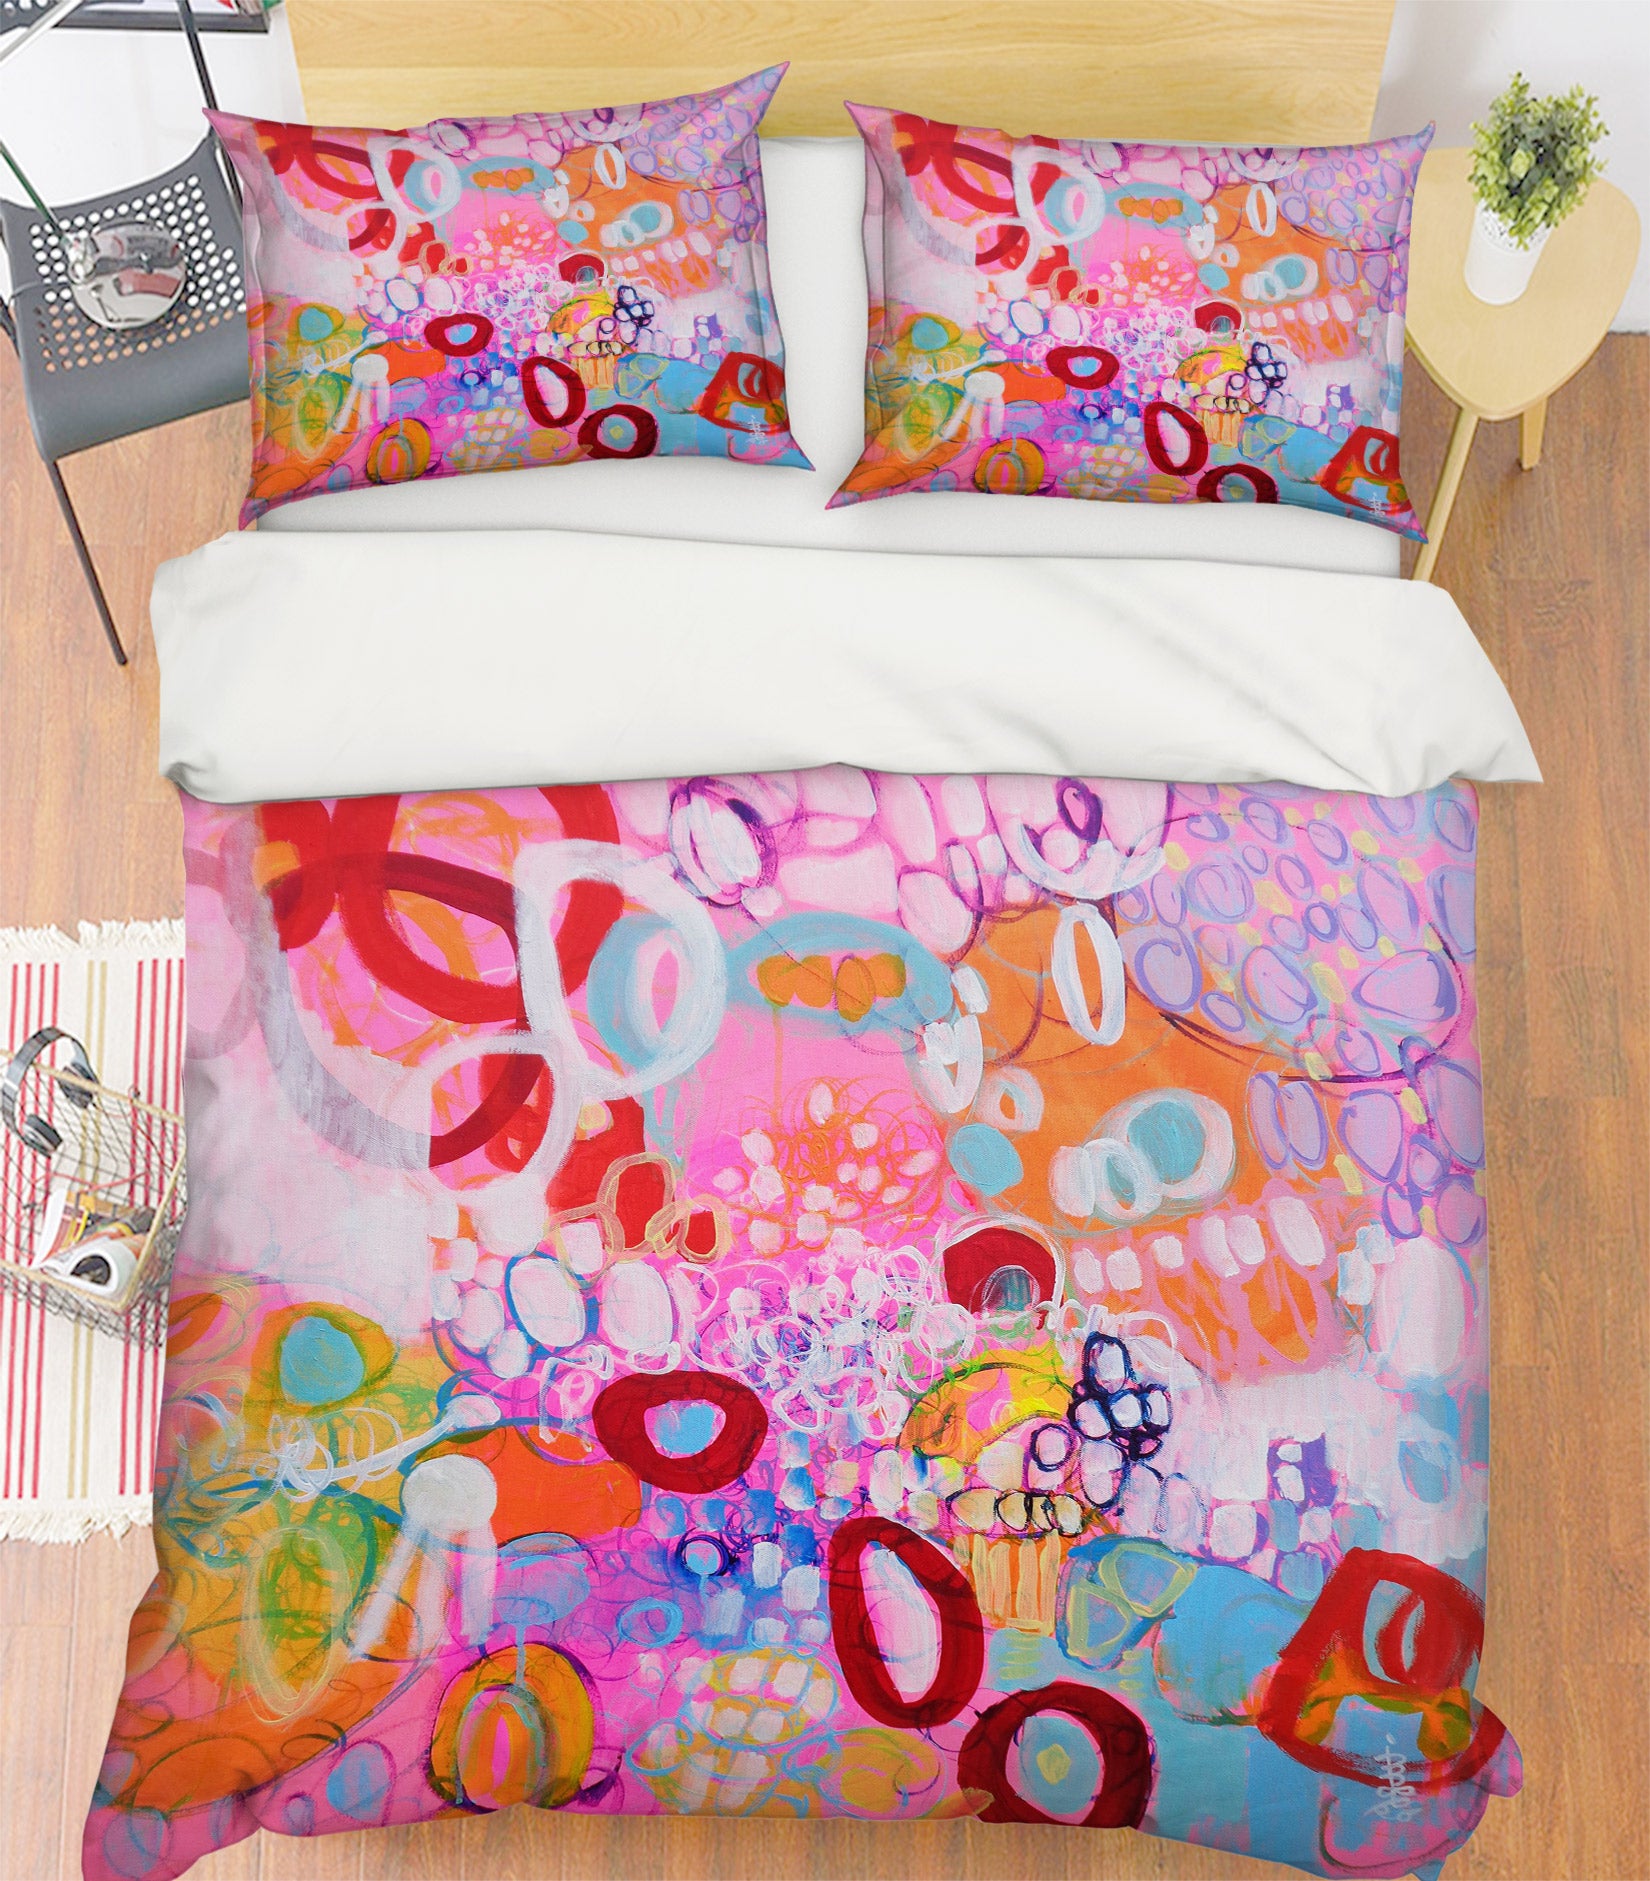 3D Red Circle Bubble 1153 Misako Chida Bedding Bed Pillowcases Quilt Cover Duvet Cover